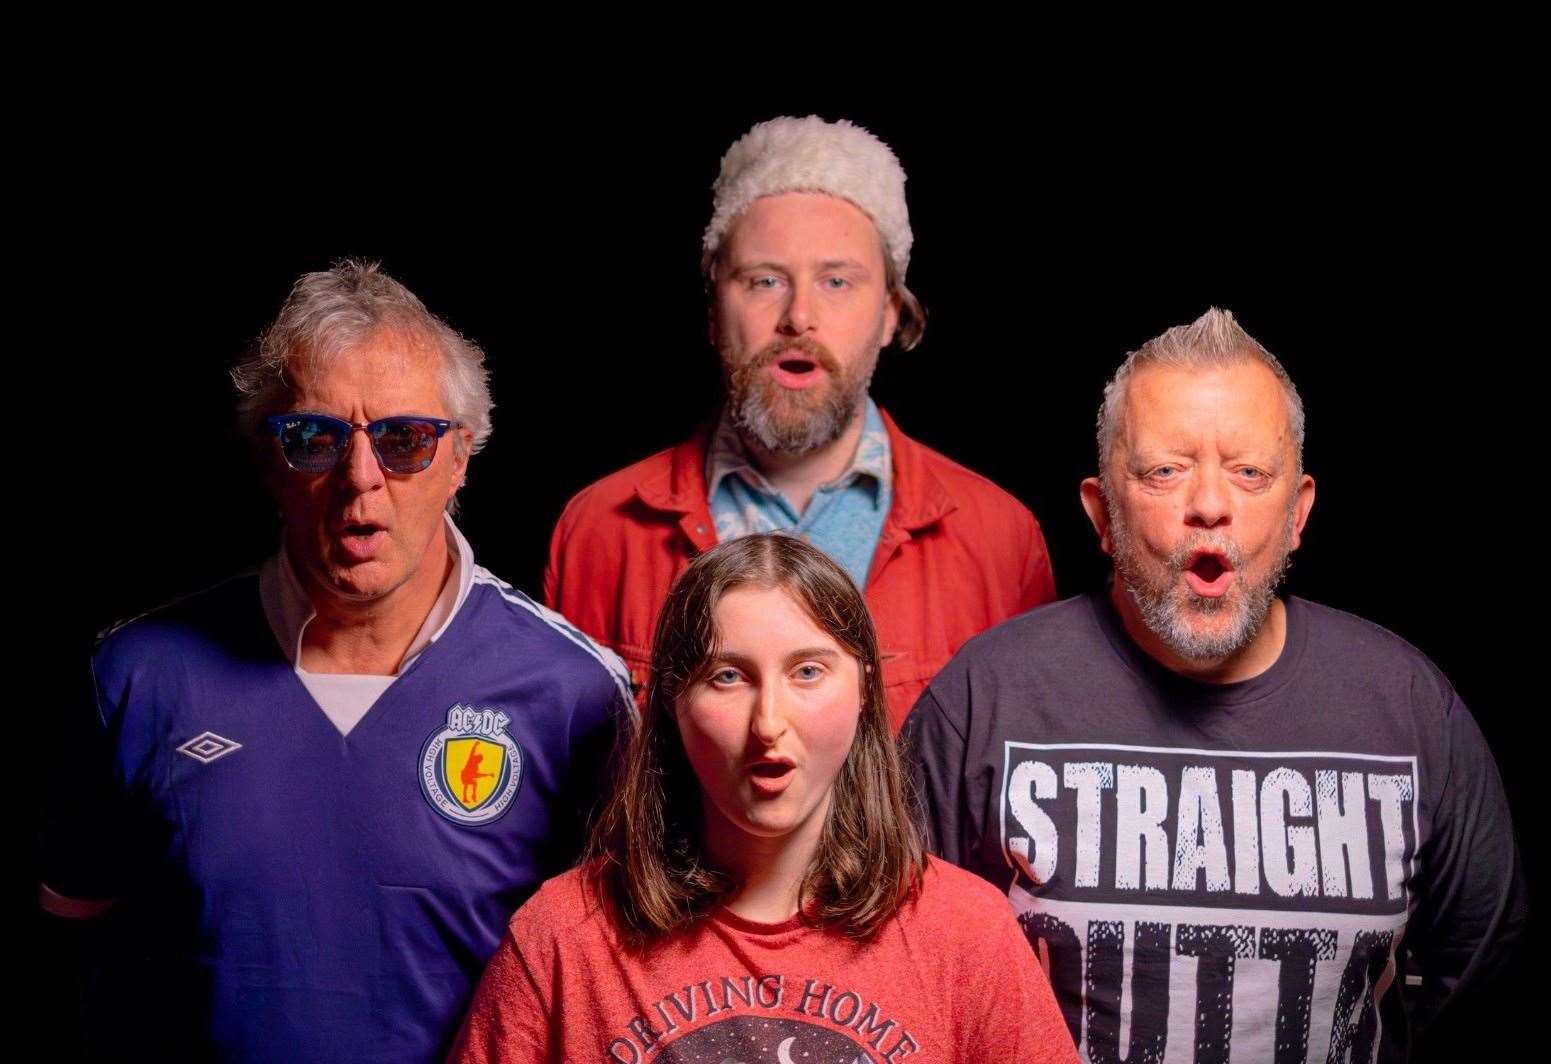 Alba Tudashi in a parody moment based on Queen's Bohemian Rapsody video. David Cormack (left) with band members Anna Matheson, Craig Swinburn and Graham Chalmers. Barry Carroll is missing from the picture.